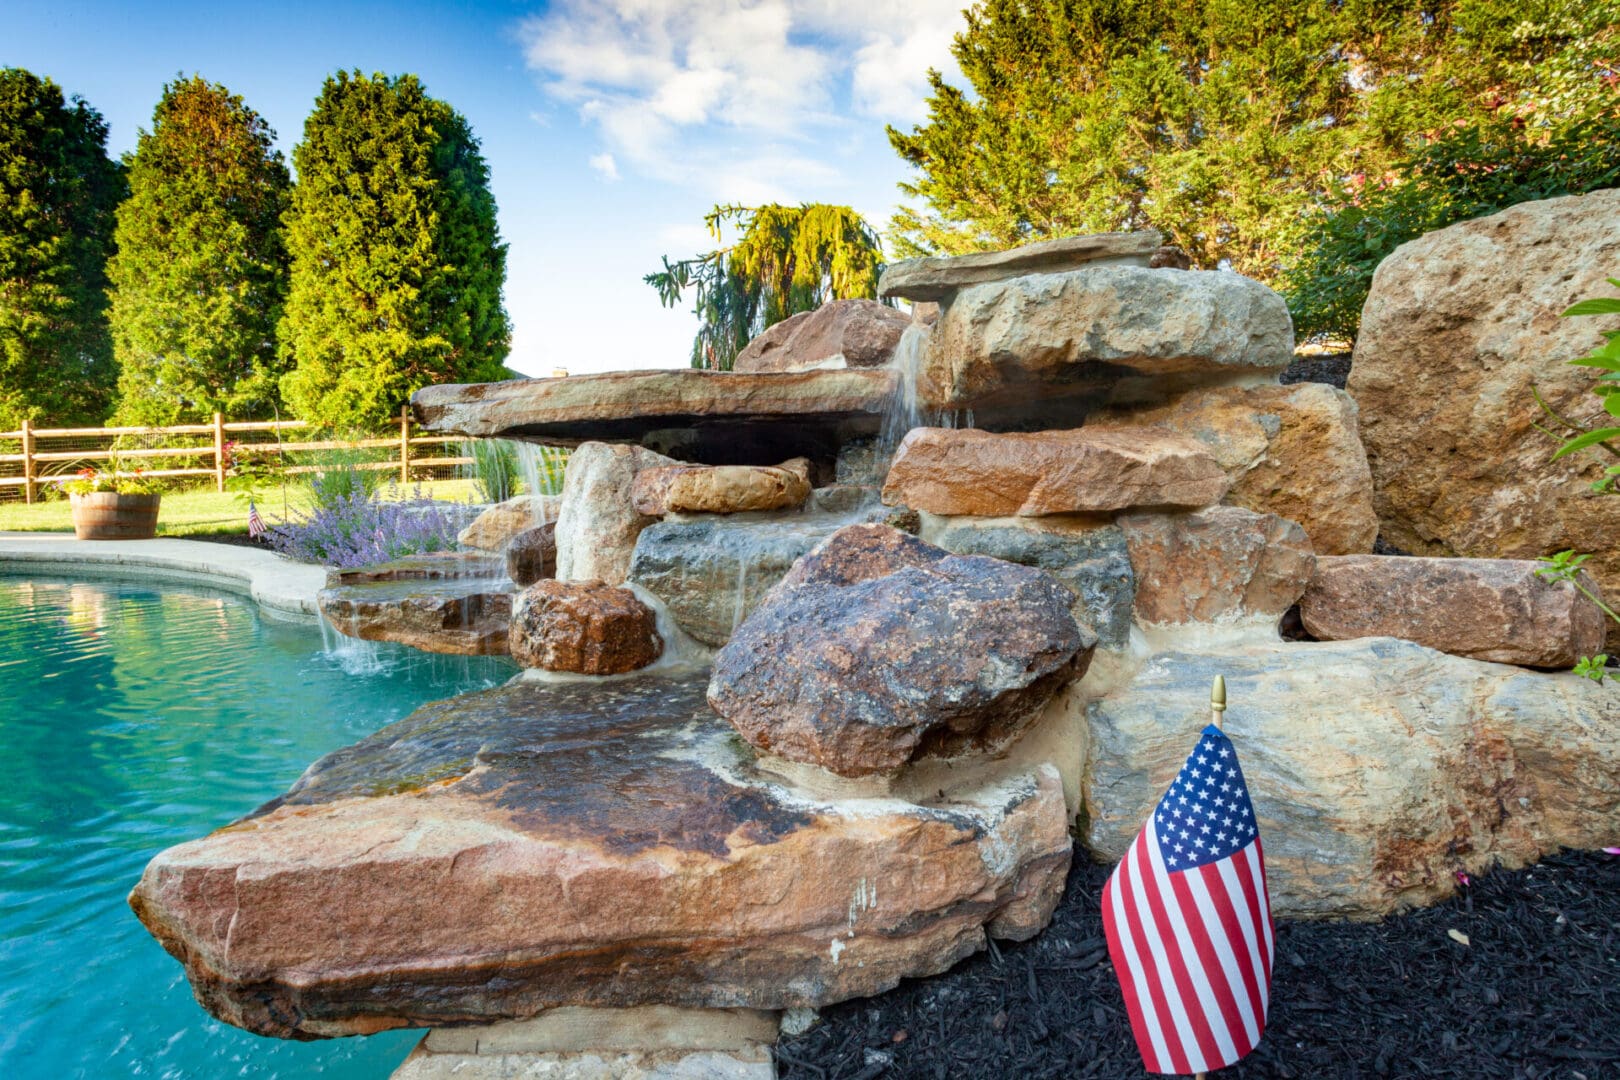 A pool with water features including a waterfall and a flag.